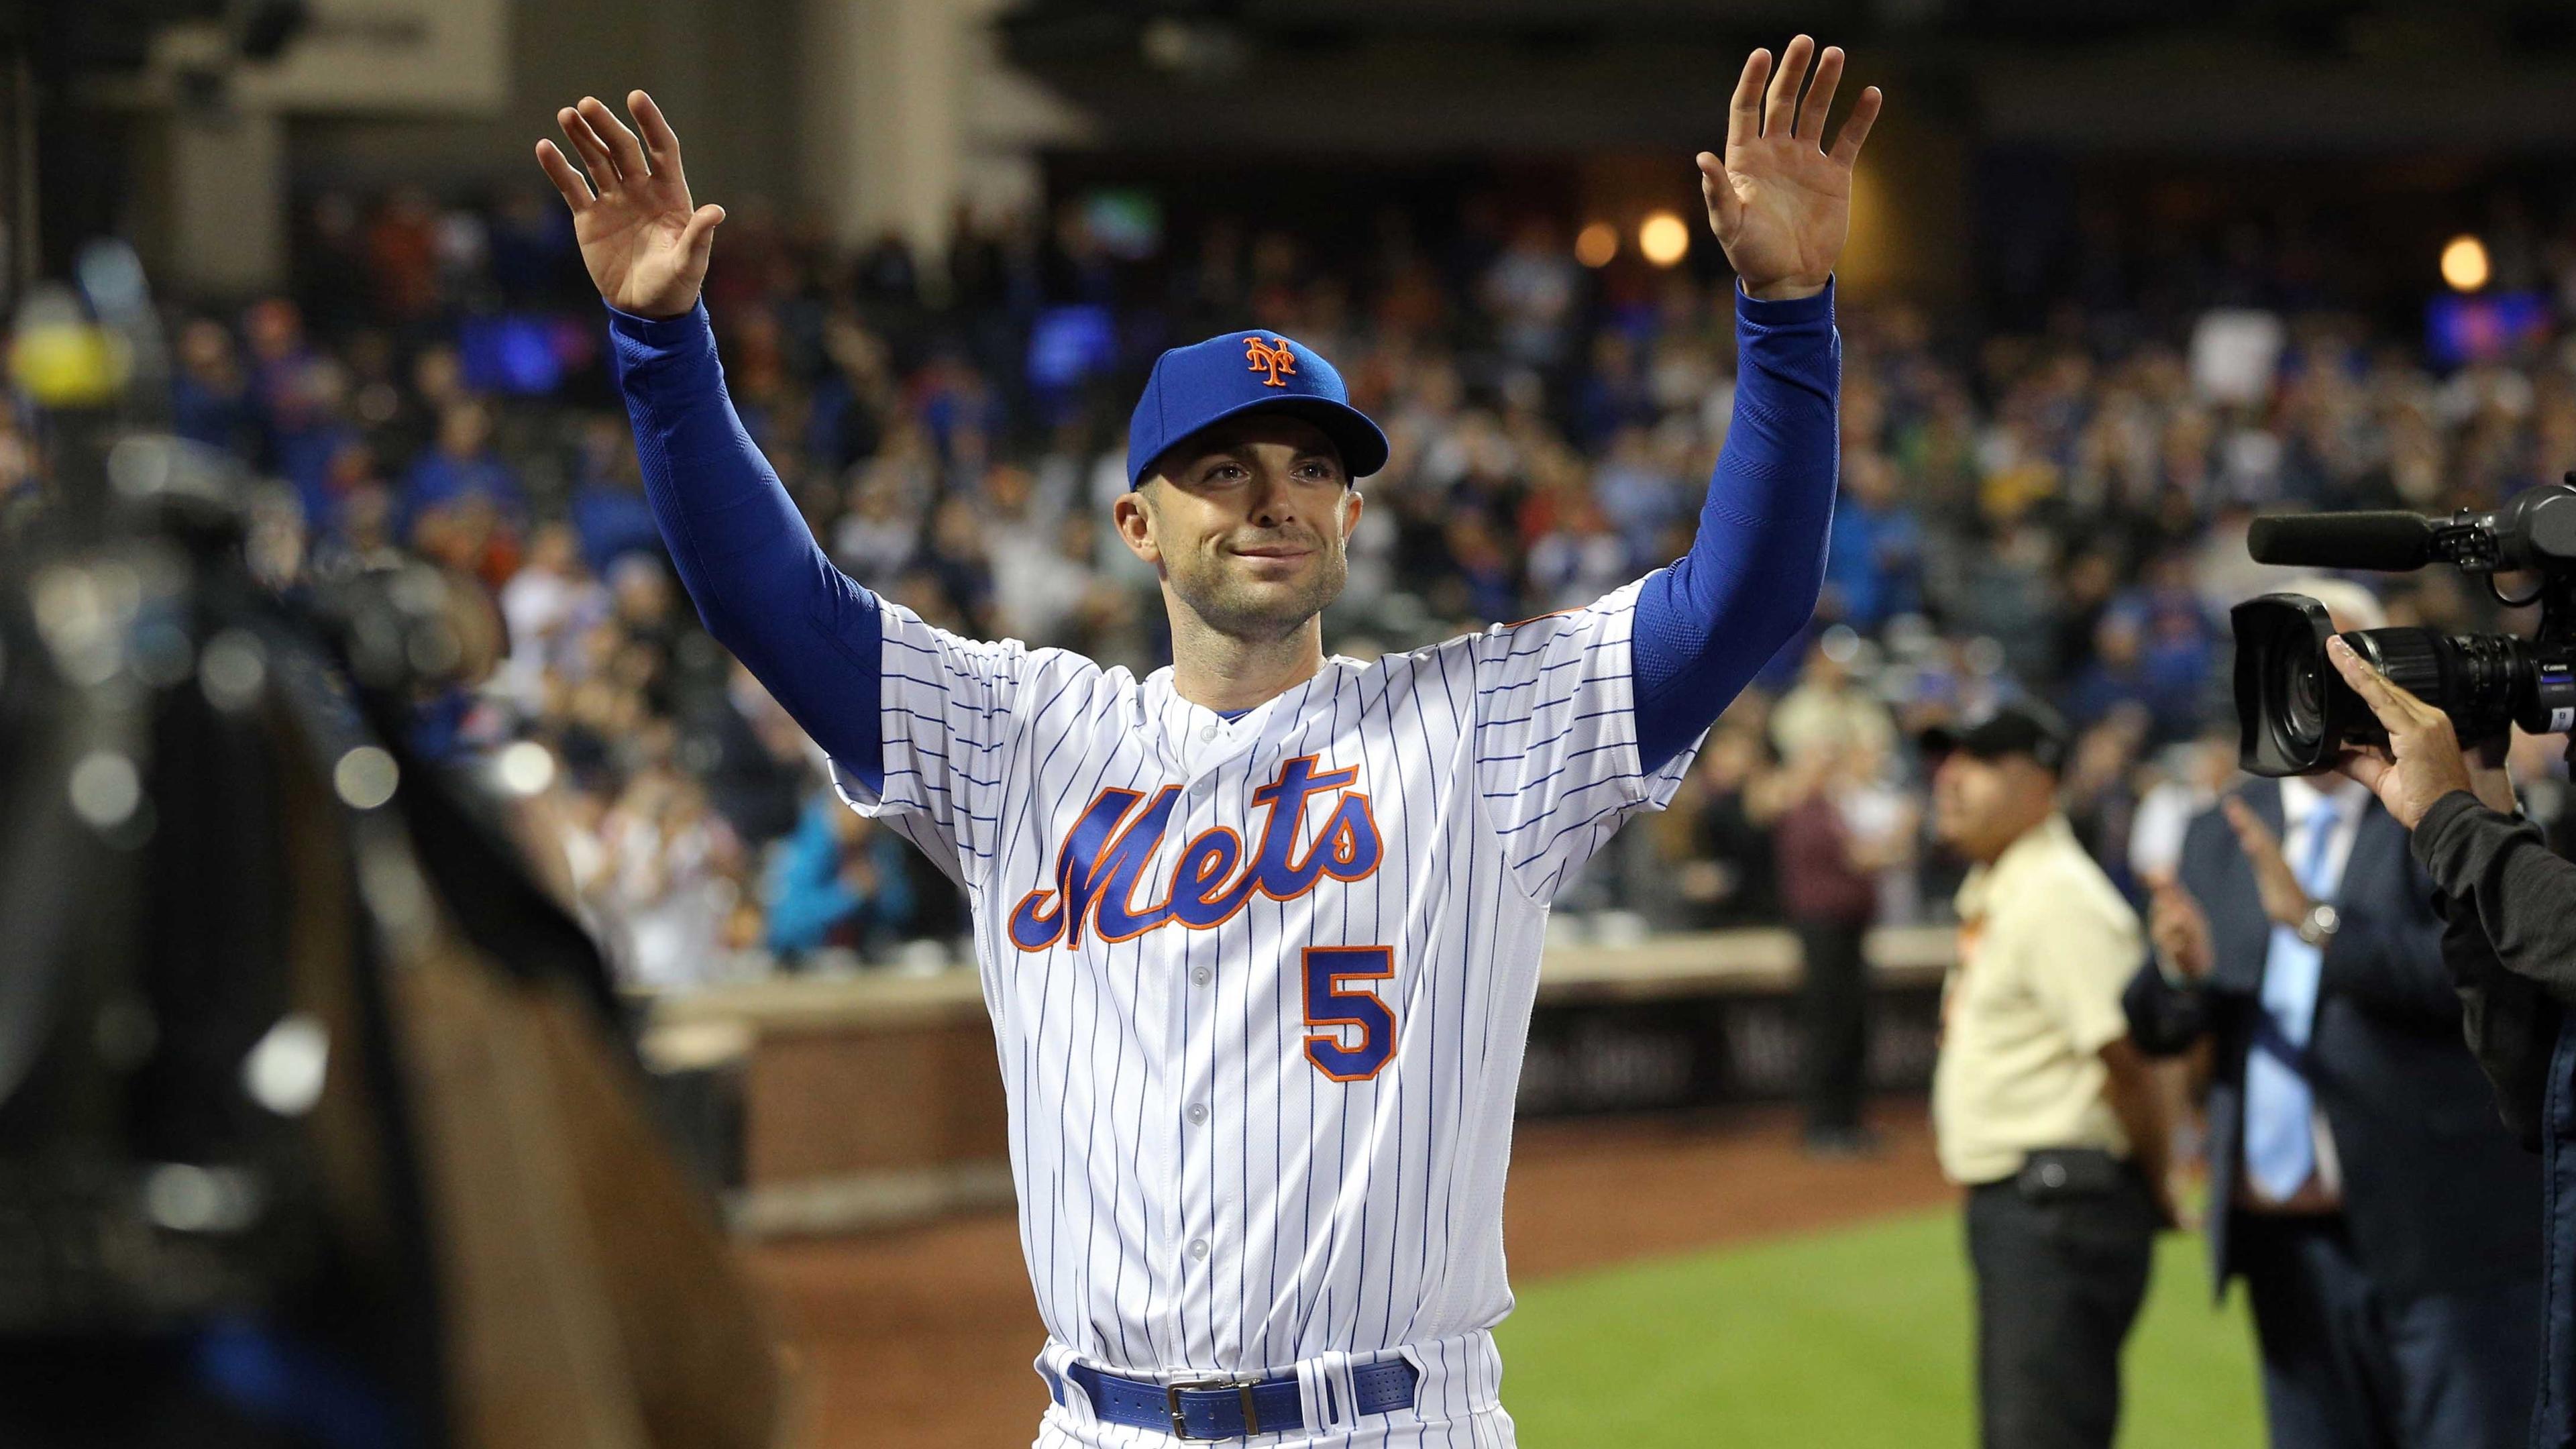 New York Mets third baseman David Wright (5) waves to the crowd after a game against the Miami Marlins at Citi Field. / Brad Penner - USA Today Sports